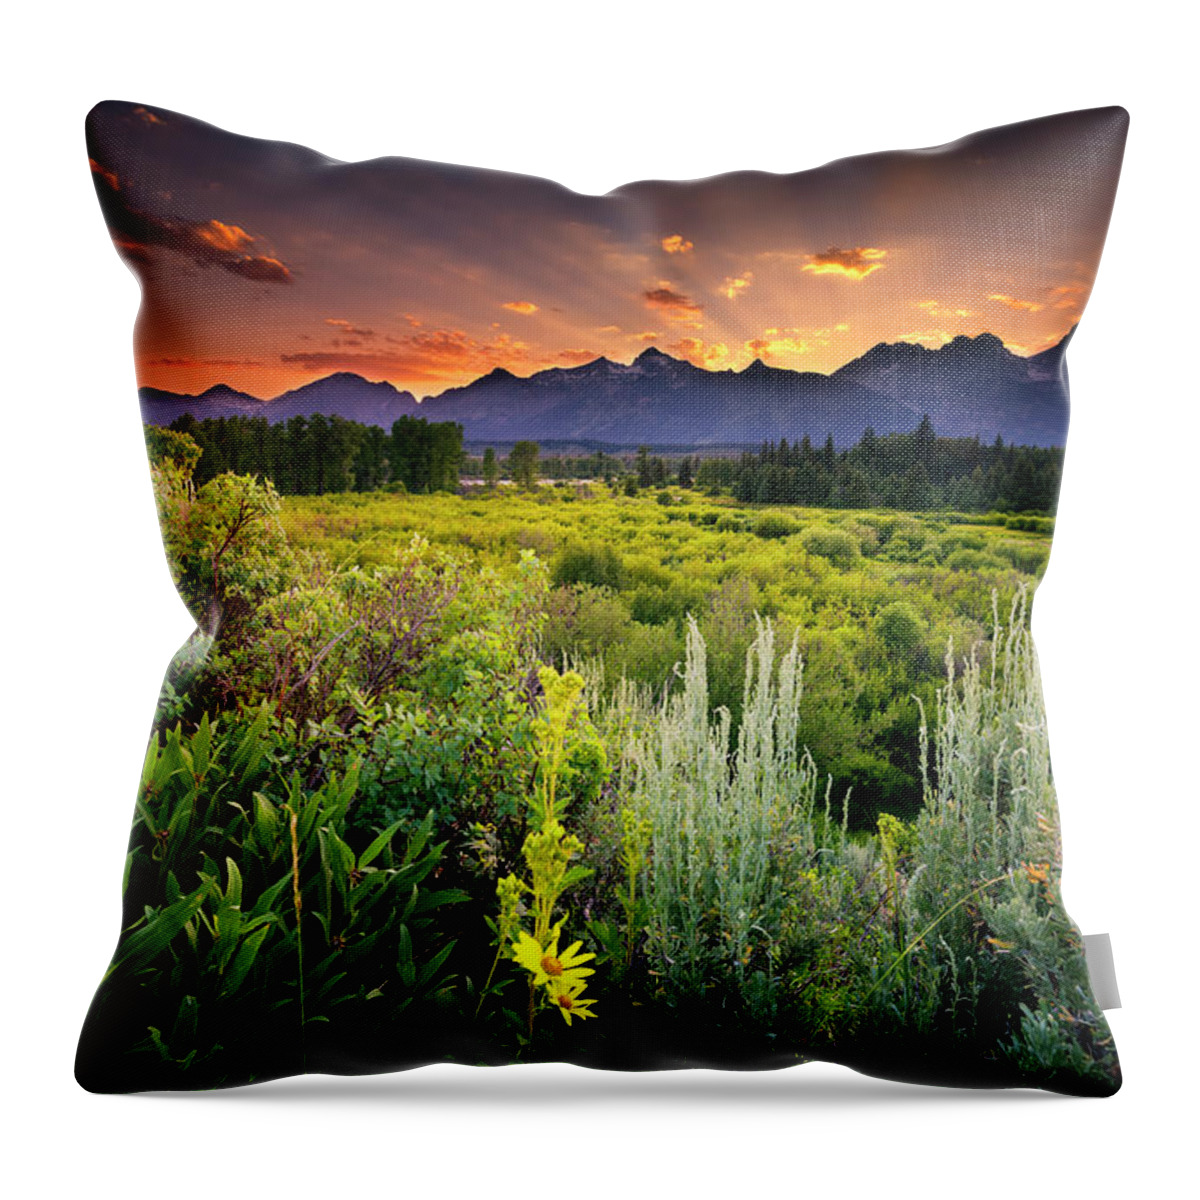 Tranquility Throw Pillow featuring the photograph Sunset At Blacktail Ponds Overlook by Dean Fikar